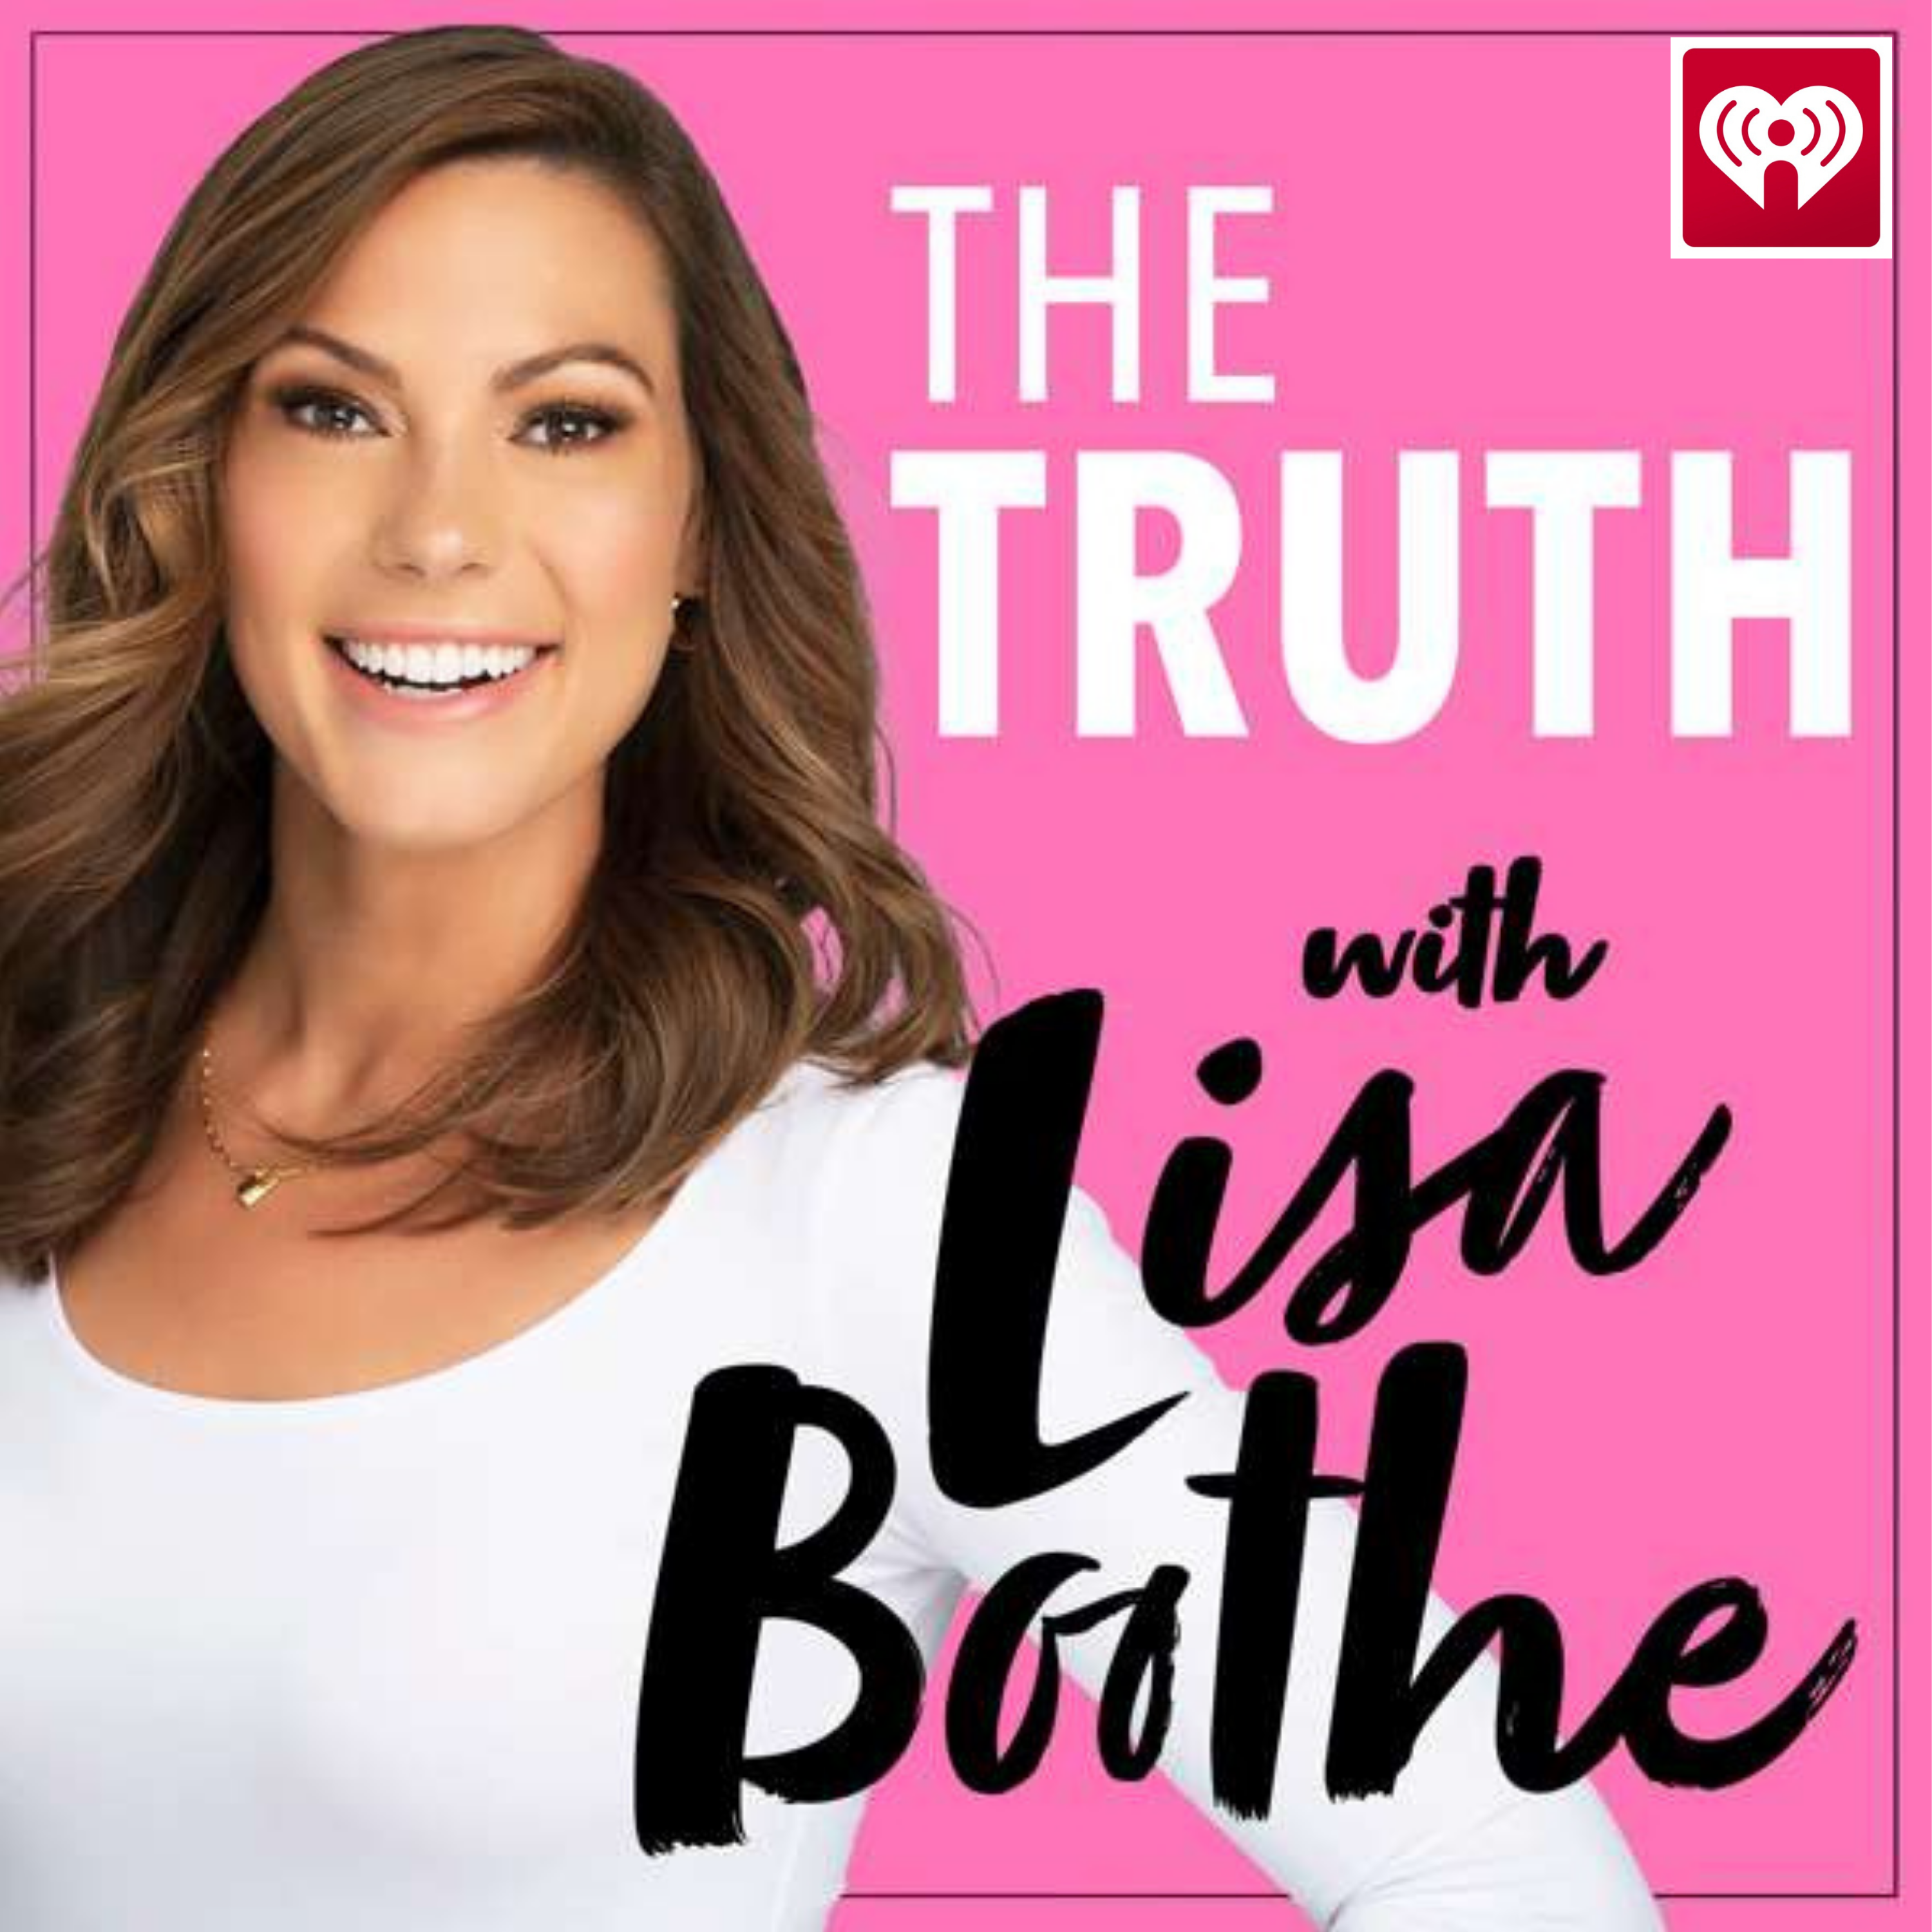 The Truth with Lisa Boothe: How Joe Biden is Costing Your Family $8K a Year with EJ Antoni